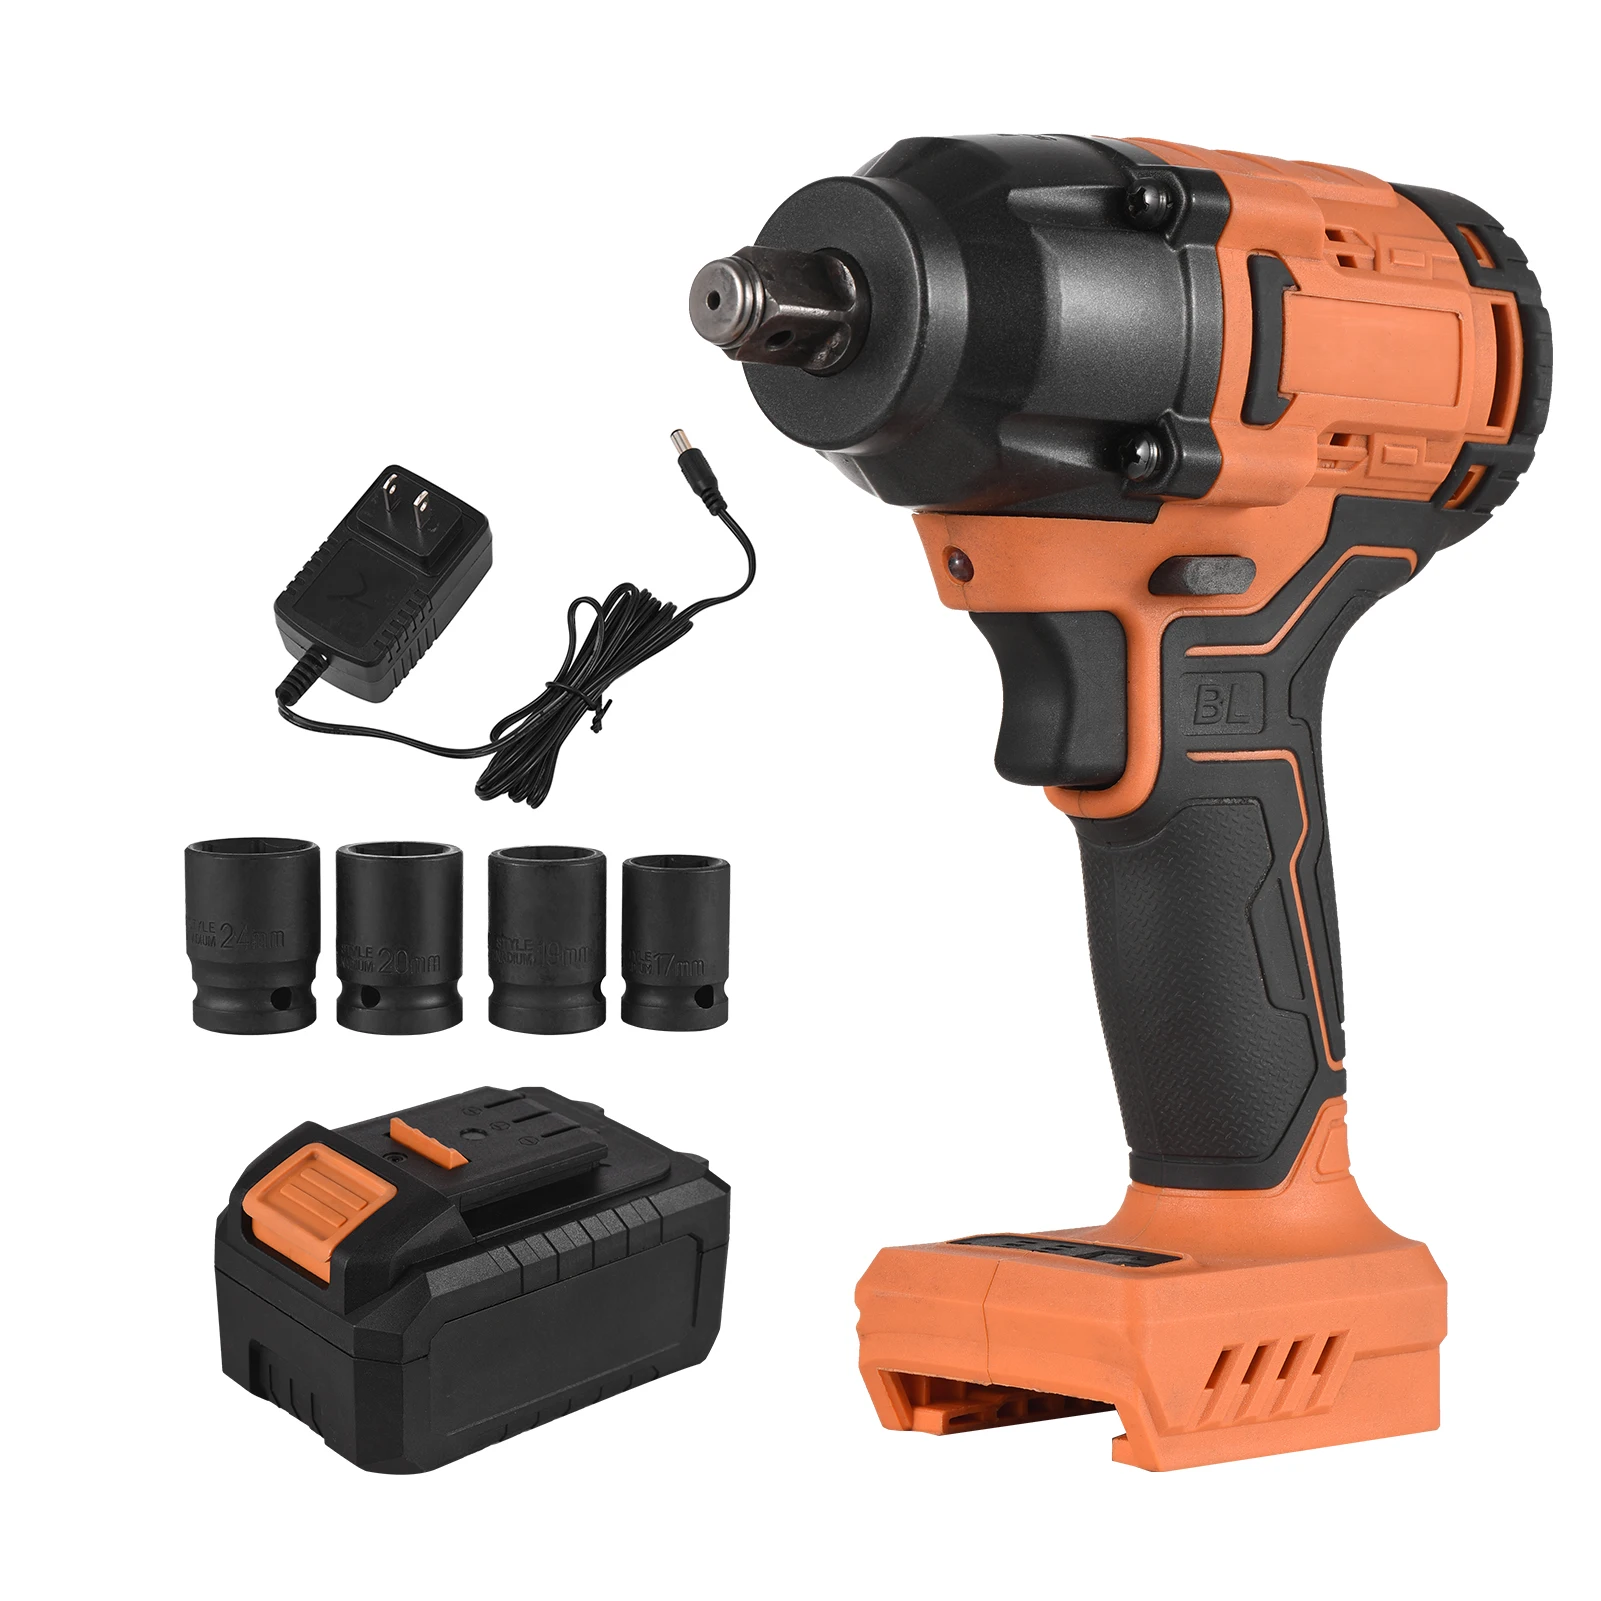 20V Cordless Brushless Impact Wrench 420N.m Torque Handheld Power Wrench with 4 Sockets 3.0Ah Lithium Battery Fast Charger